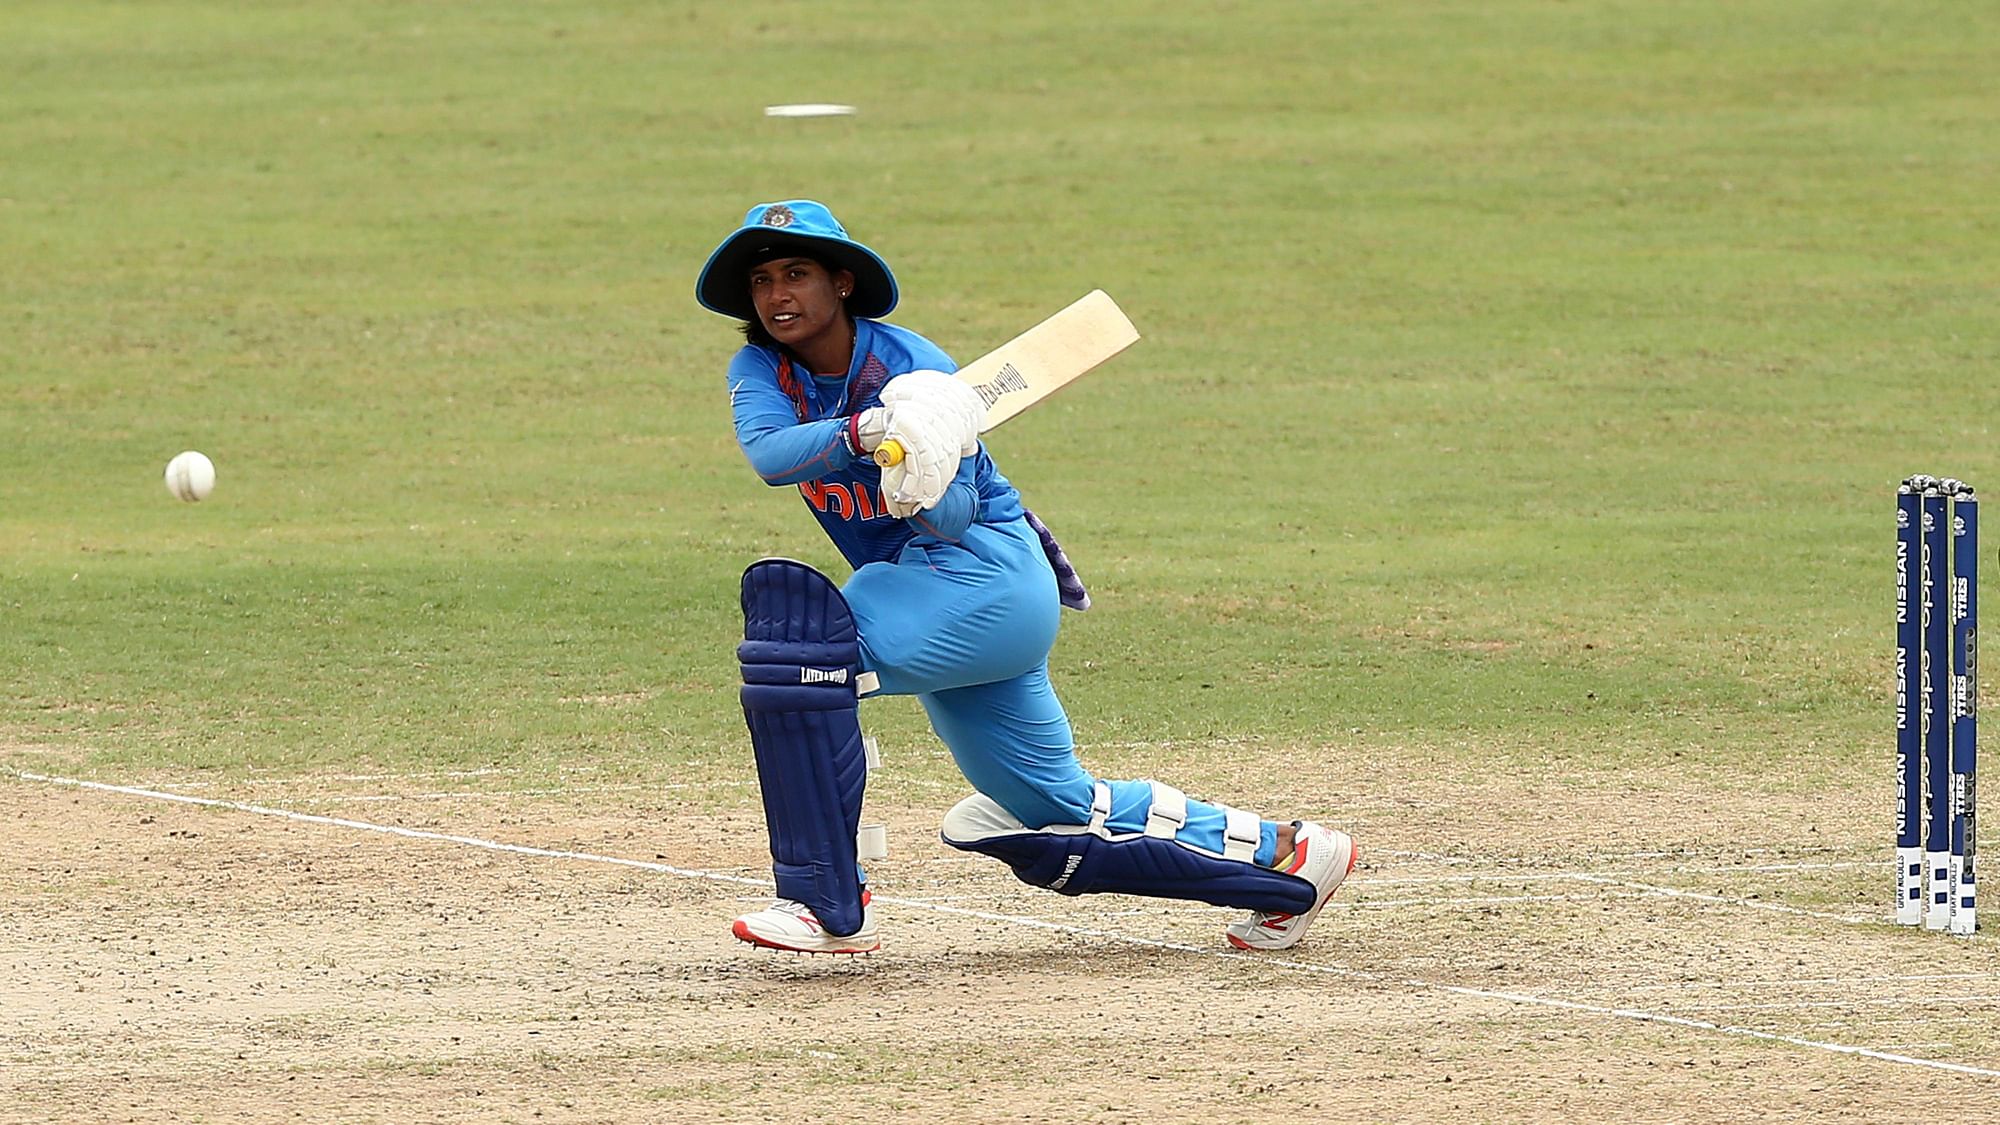 Mithali Raj plays a shot on the leg side in the World T20 match against Ireland.